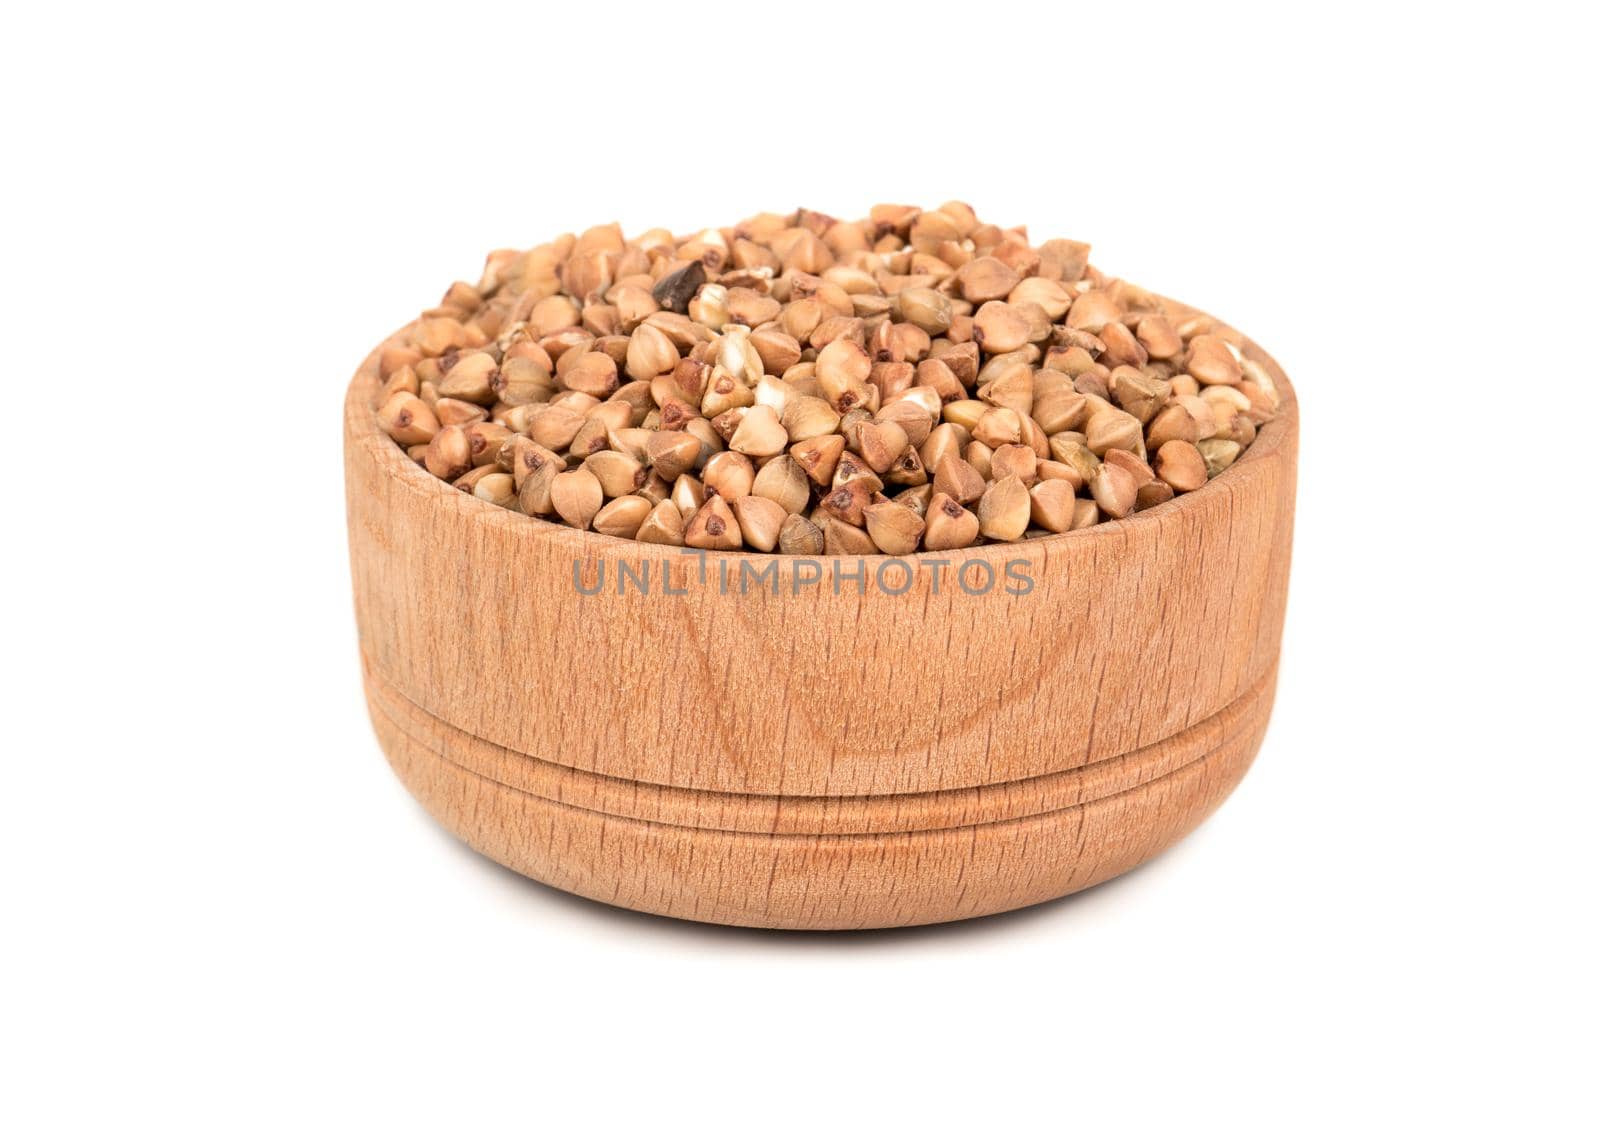 Dry grain buckwheat in a wooden bowl on a white background